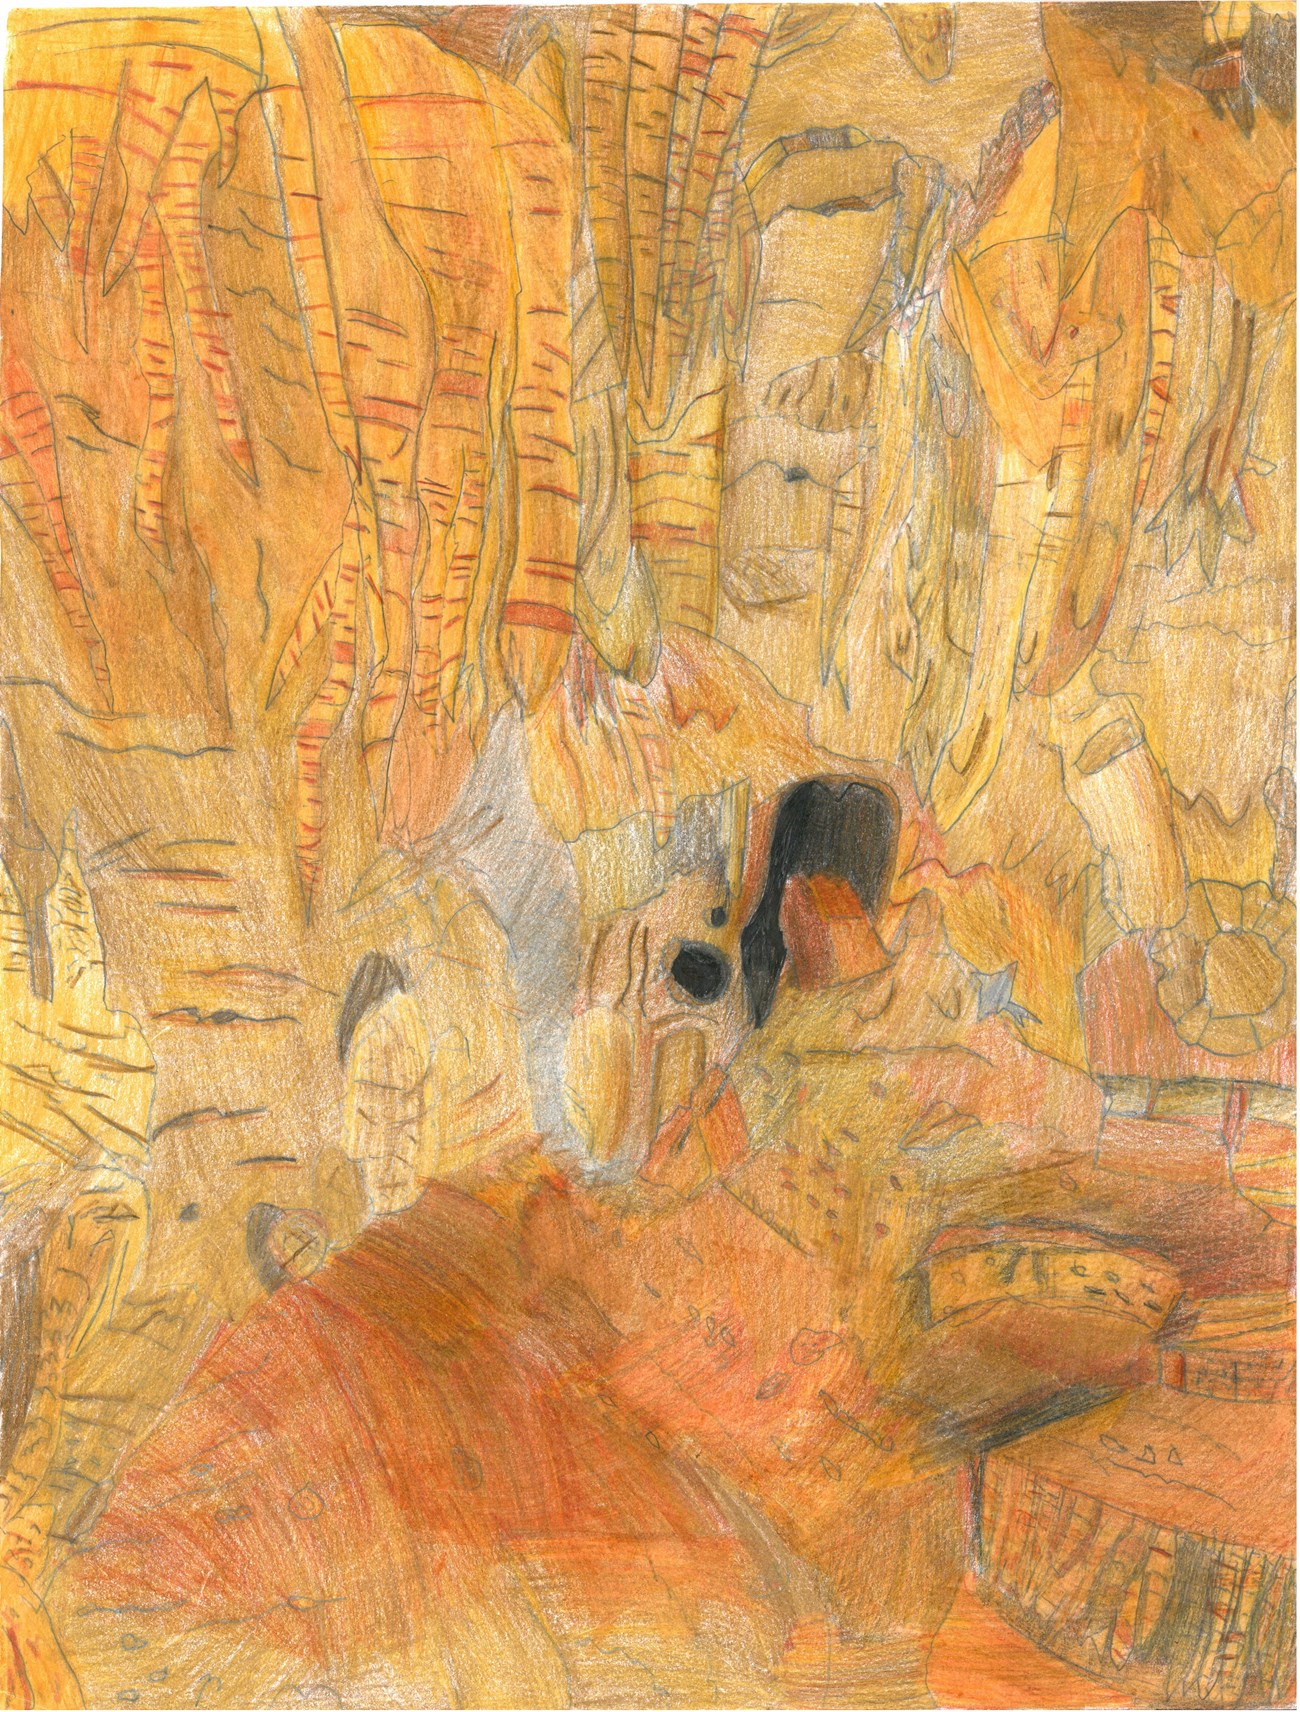 Complex color pencil drawing shows a wall of stalactites and stalagmites in tans, browns, and orange.